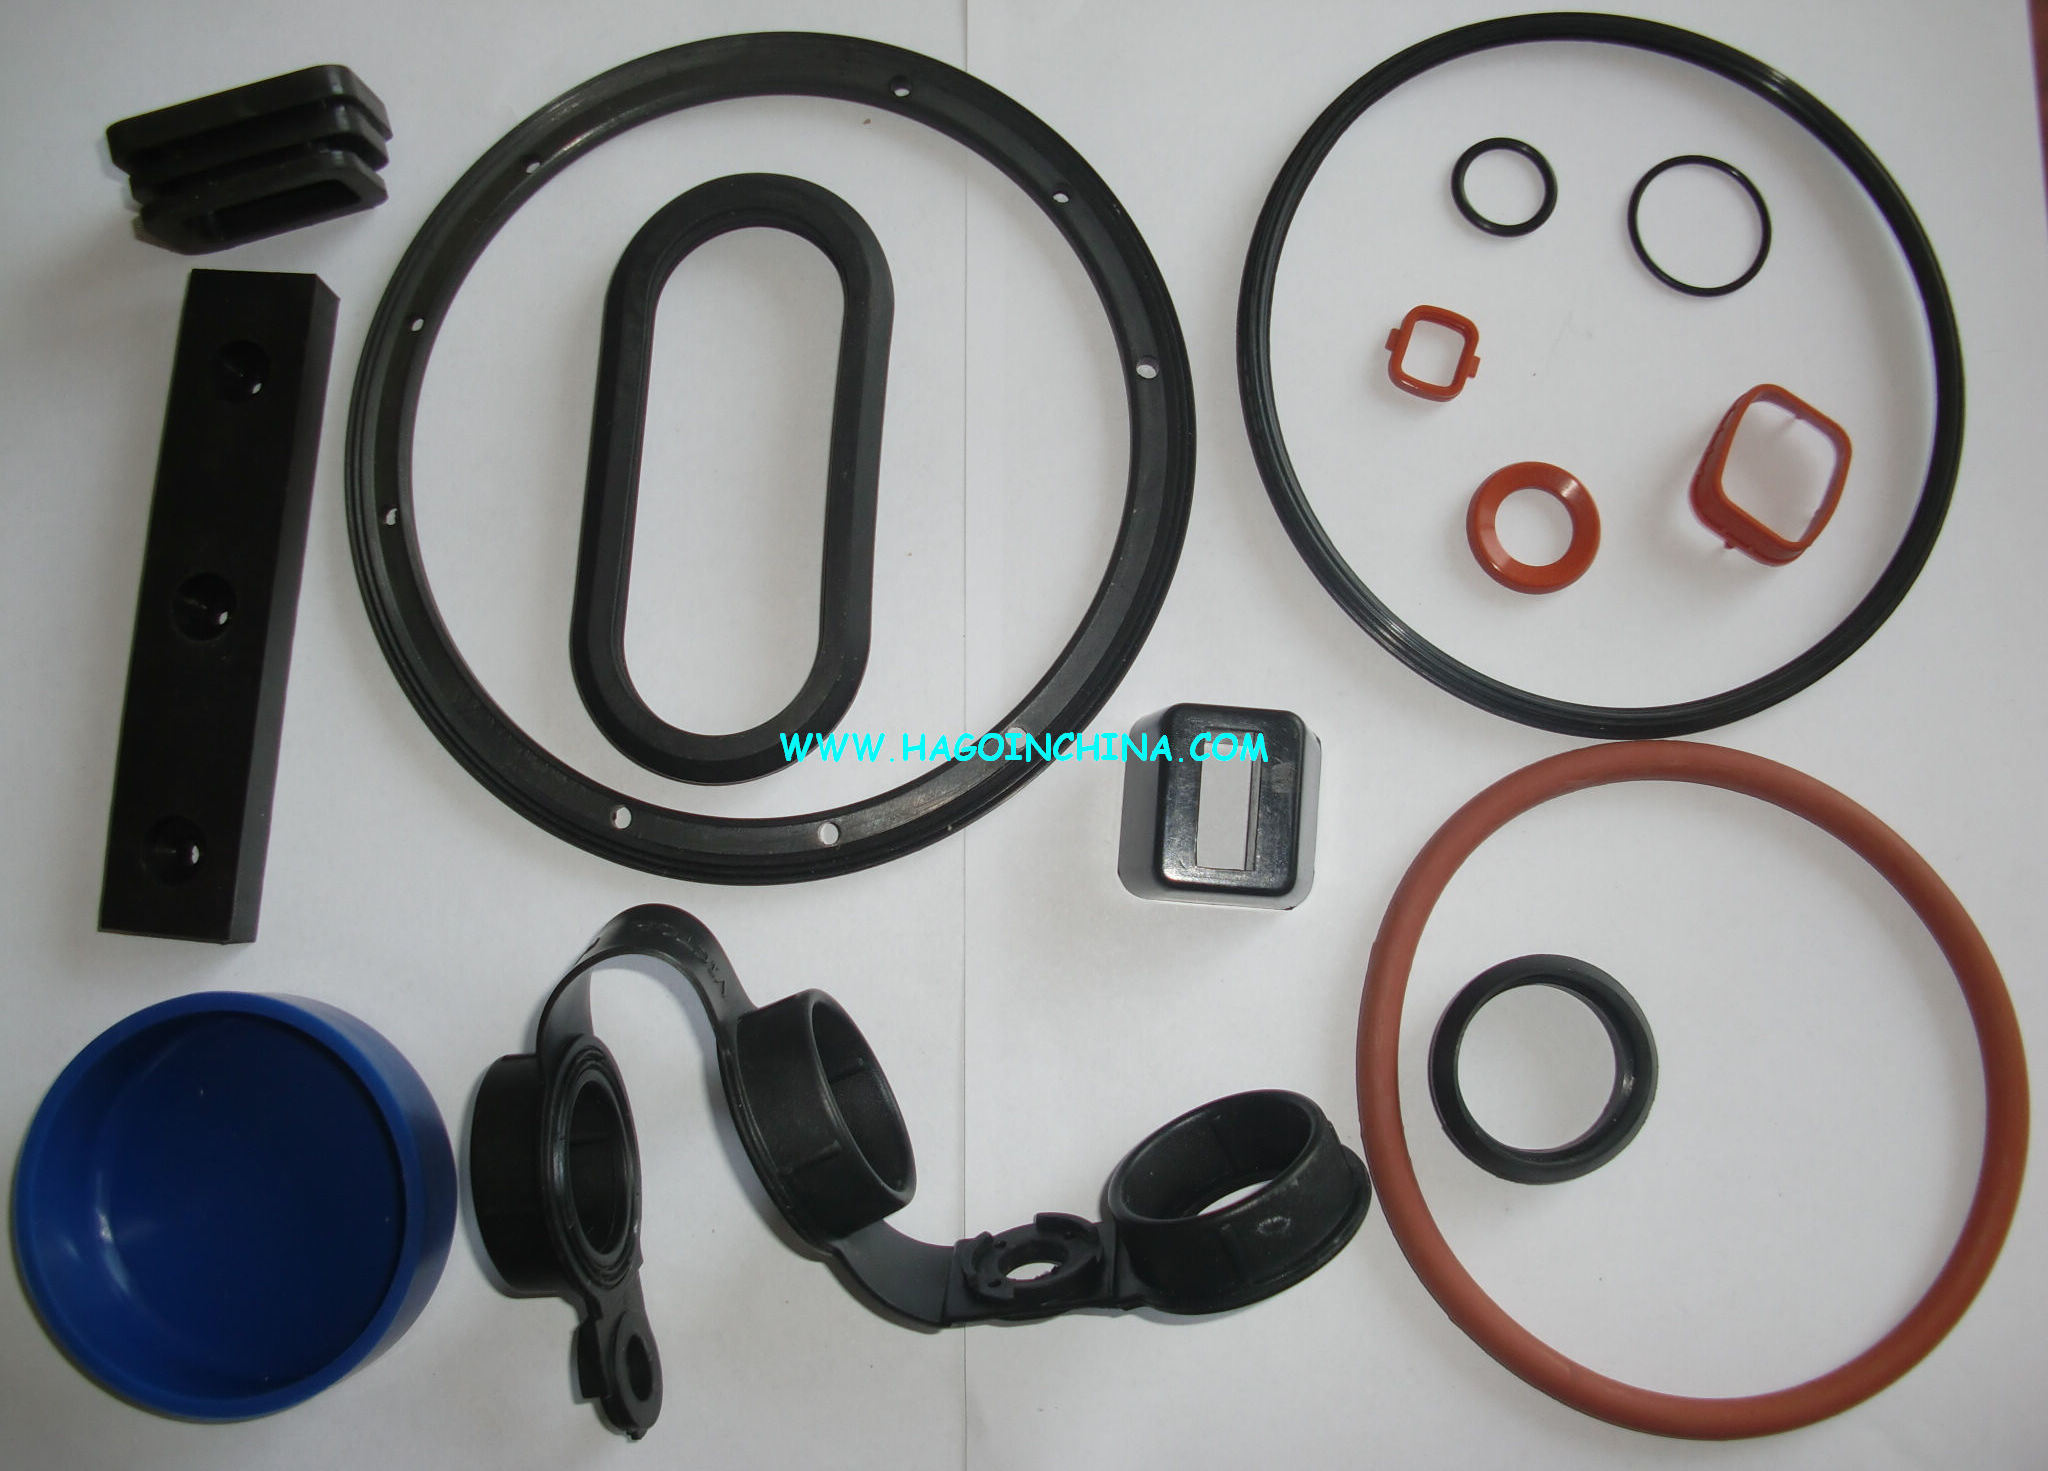 OEM Customized Industrial Molded Rubber Product/Part/Fitting